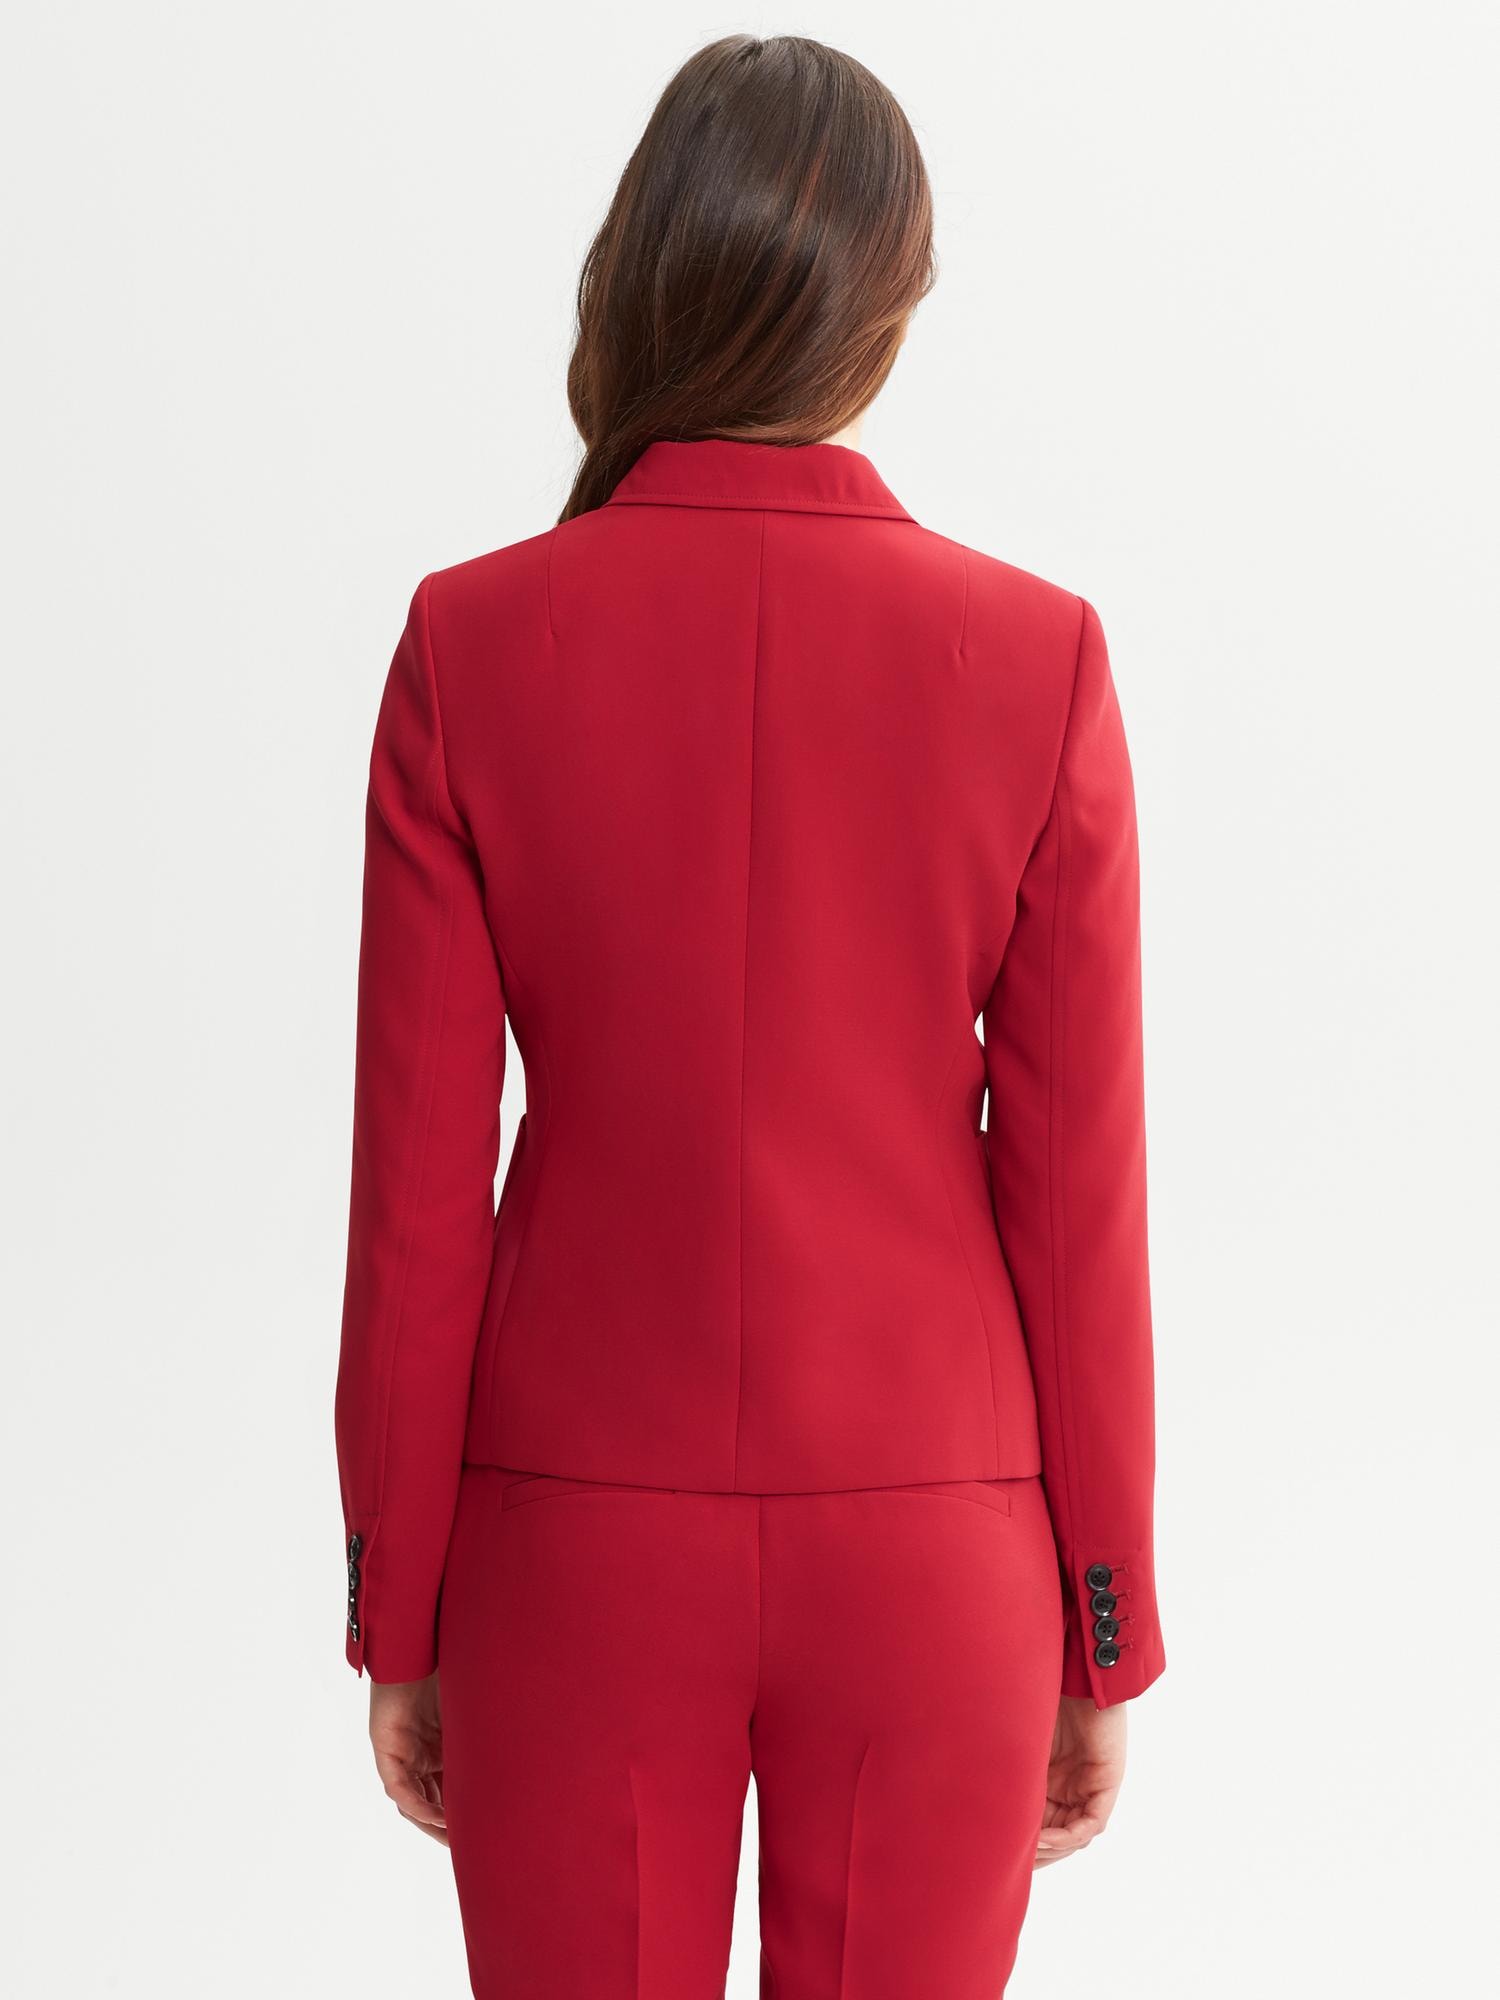 Red Crepe Two-Button Blazer